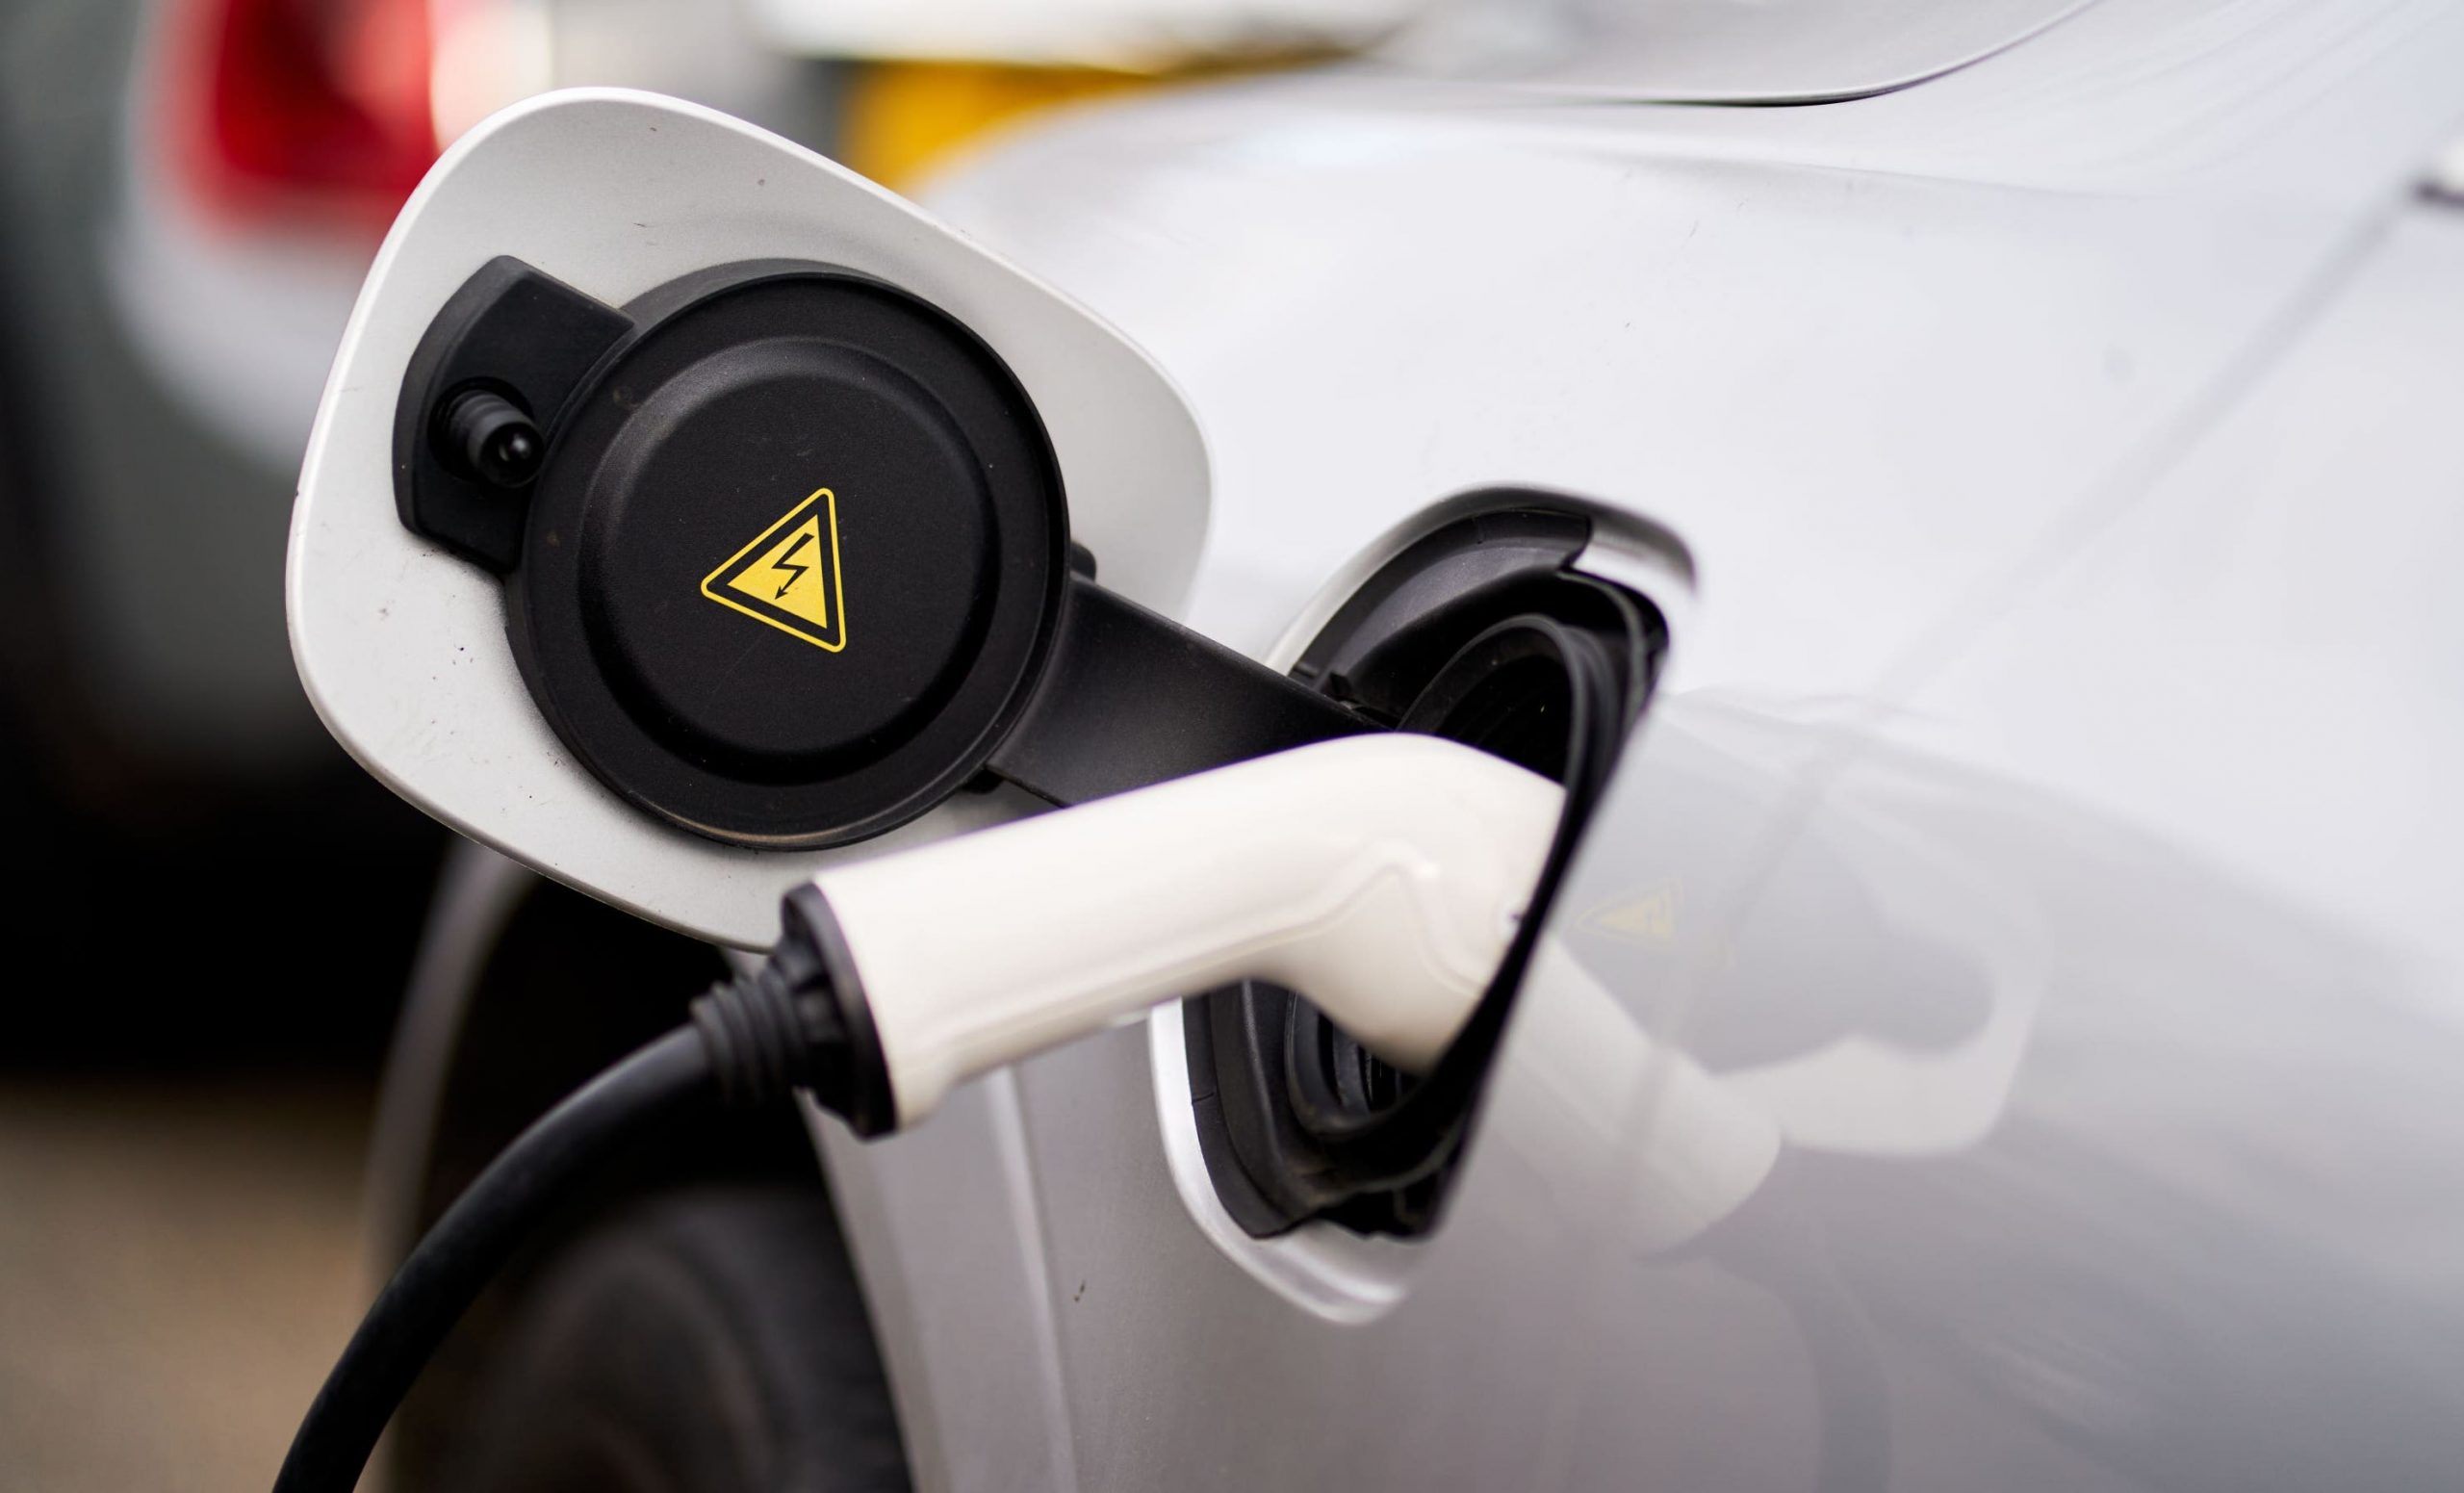 Ninety per cent of EV owners say they'll never go back to petrol or